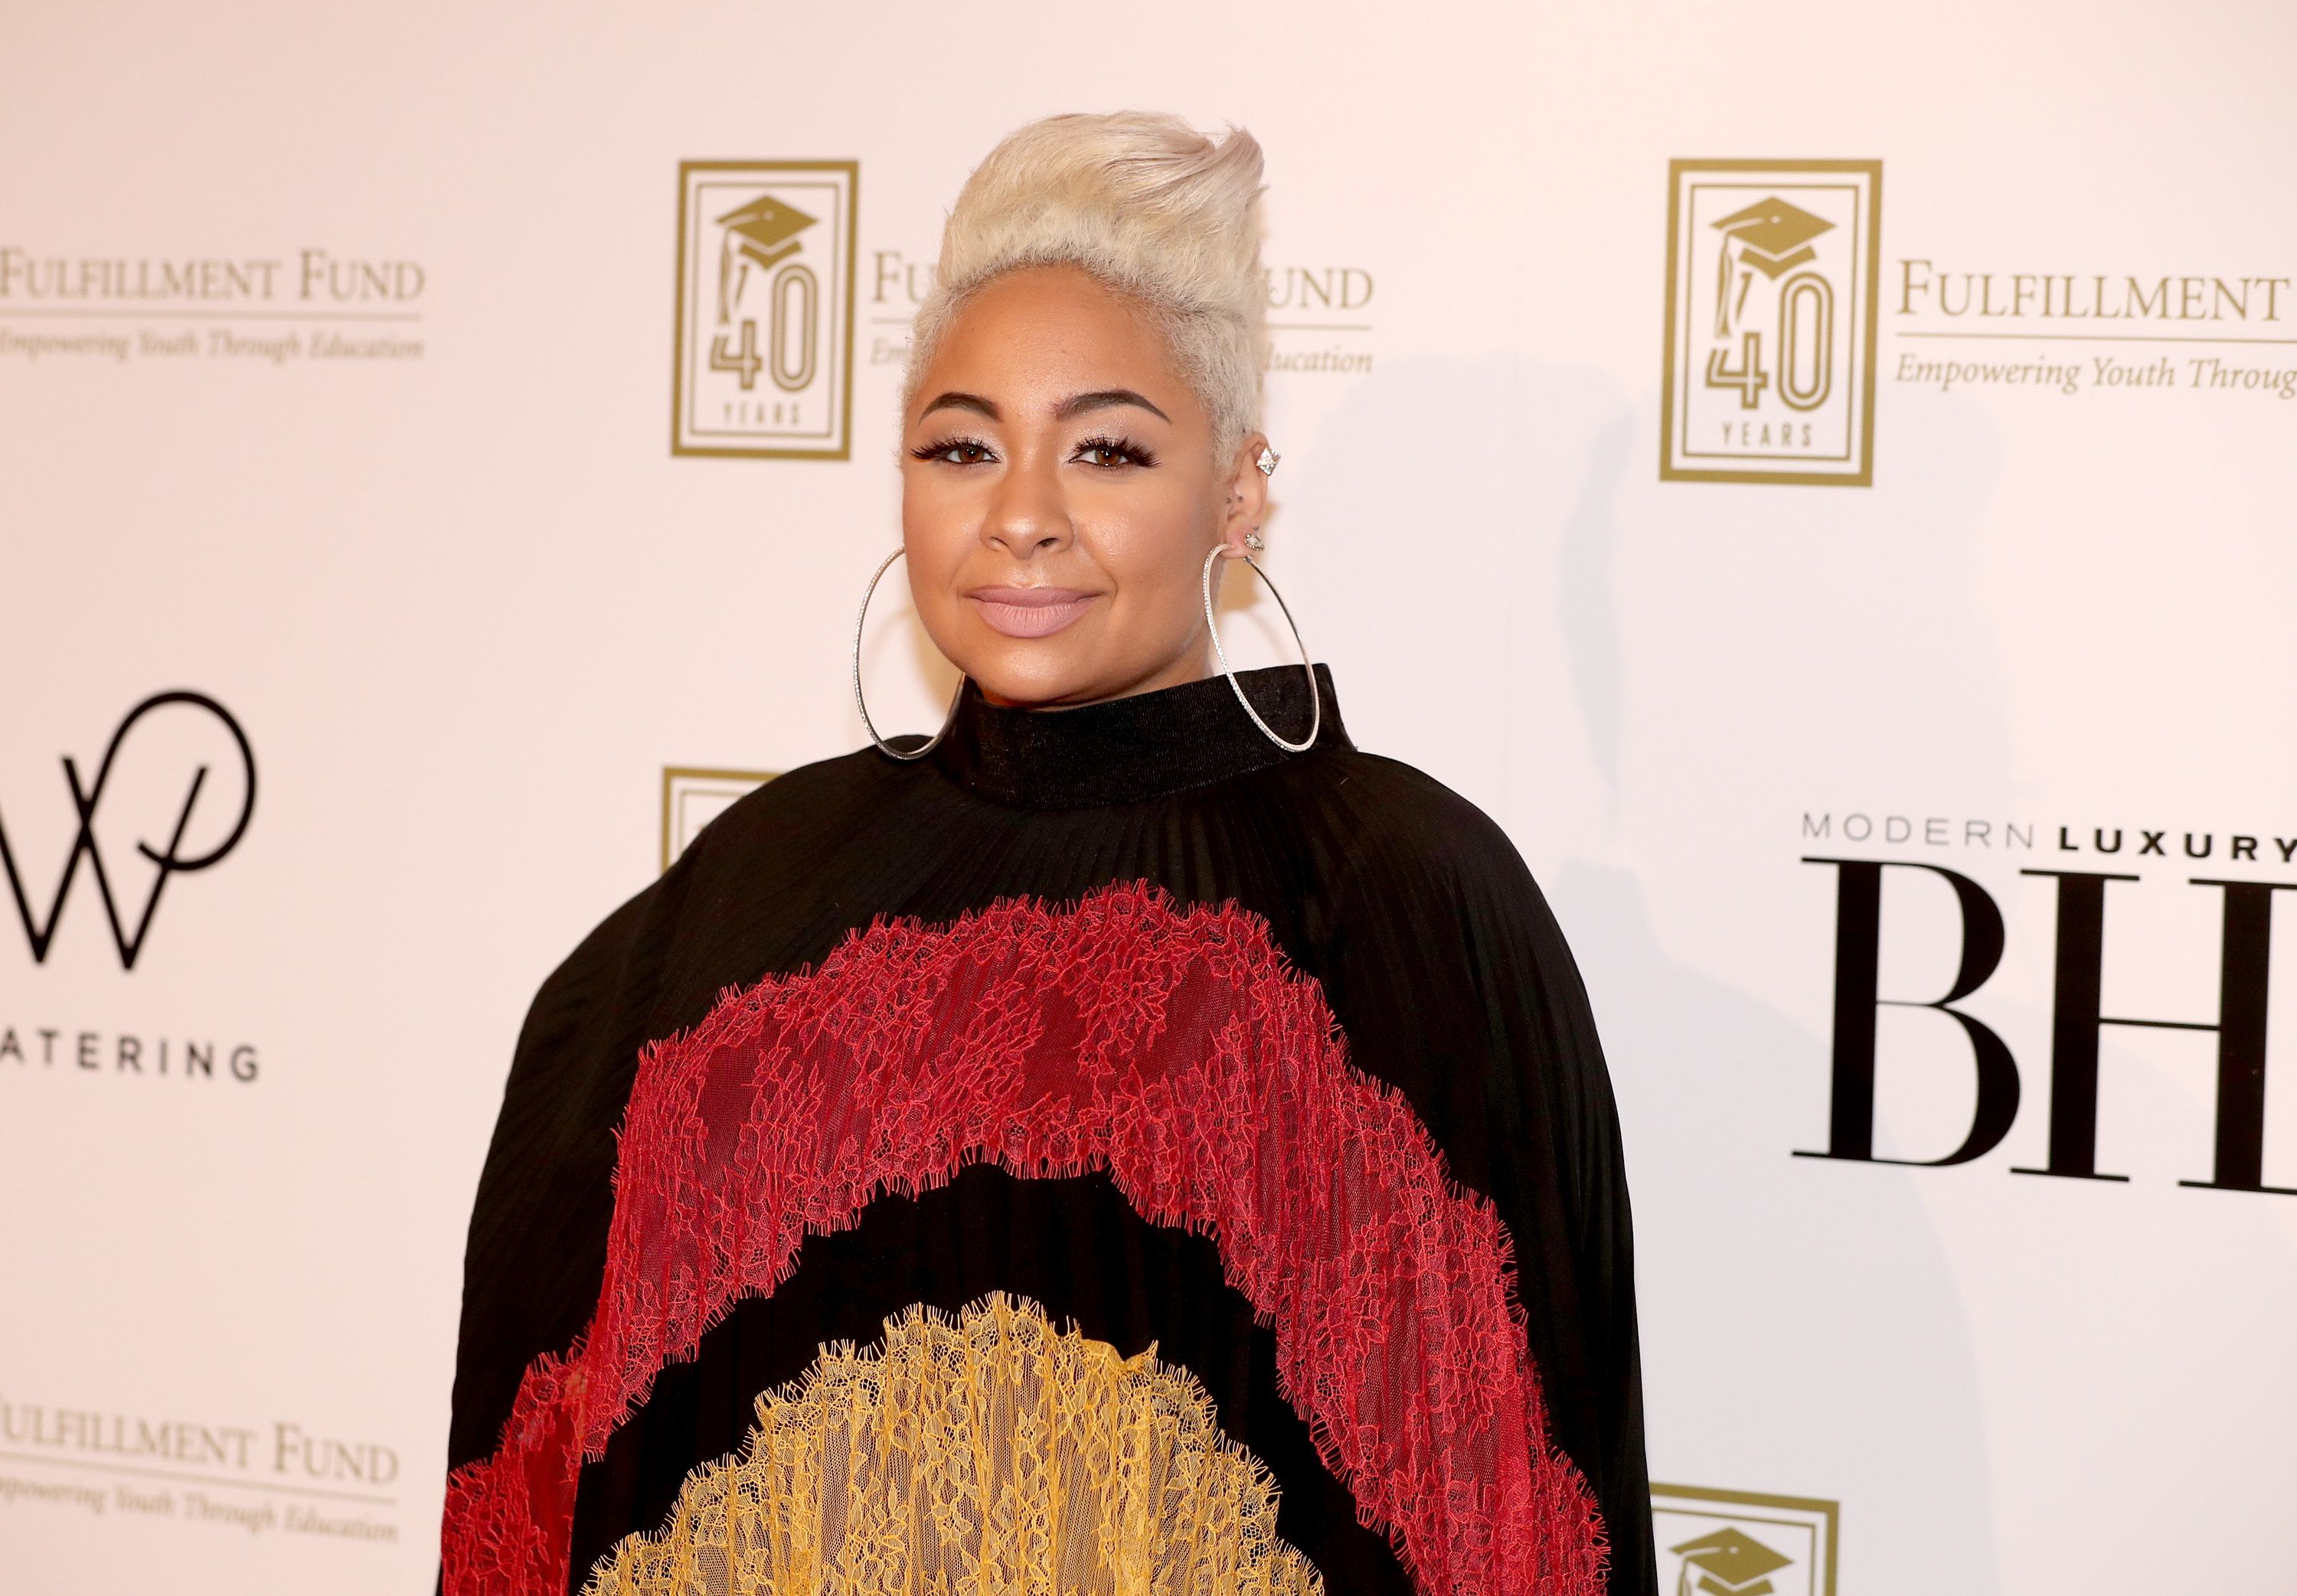 Raven-Symone at the Legacy Of Changing Lives presented by the Fulfillment Fund at Hollywood & Highland Center on March 13, 2018 in Hollywood, California | Photo: Getty Images 